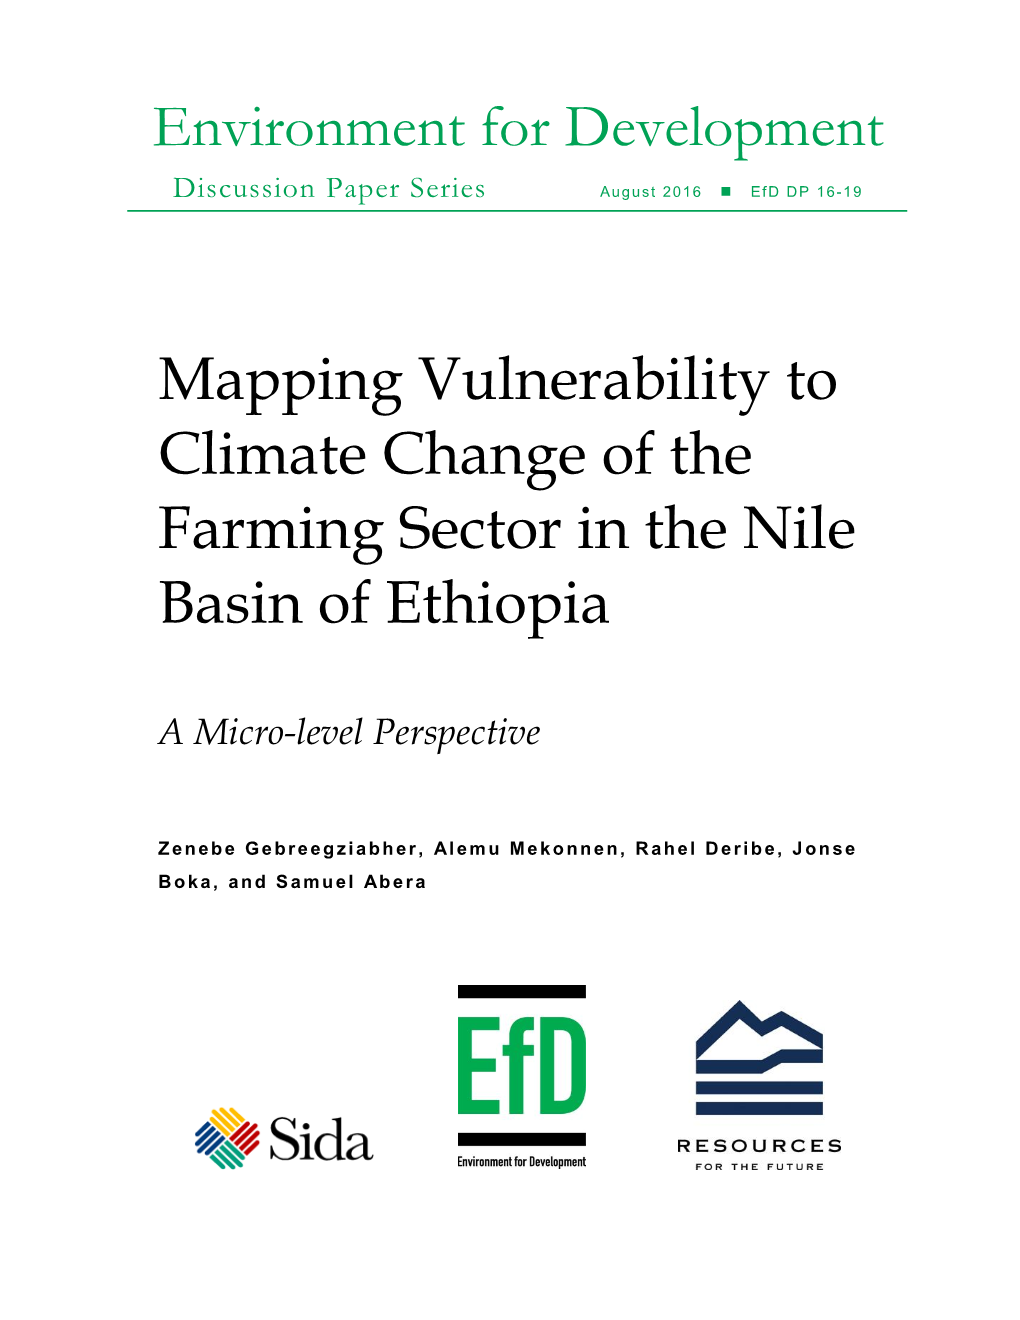 Mapping Vulnerability to Climate Change of the Farming Sector in the Nile Basin of Ethiopia